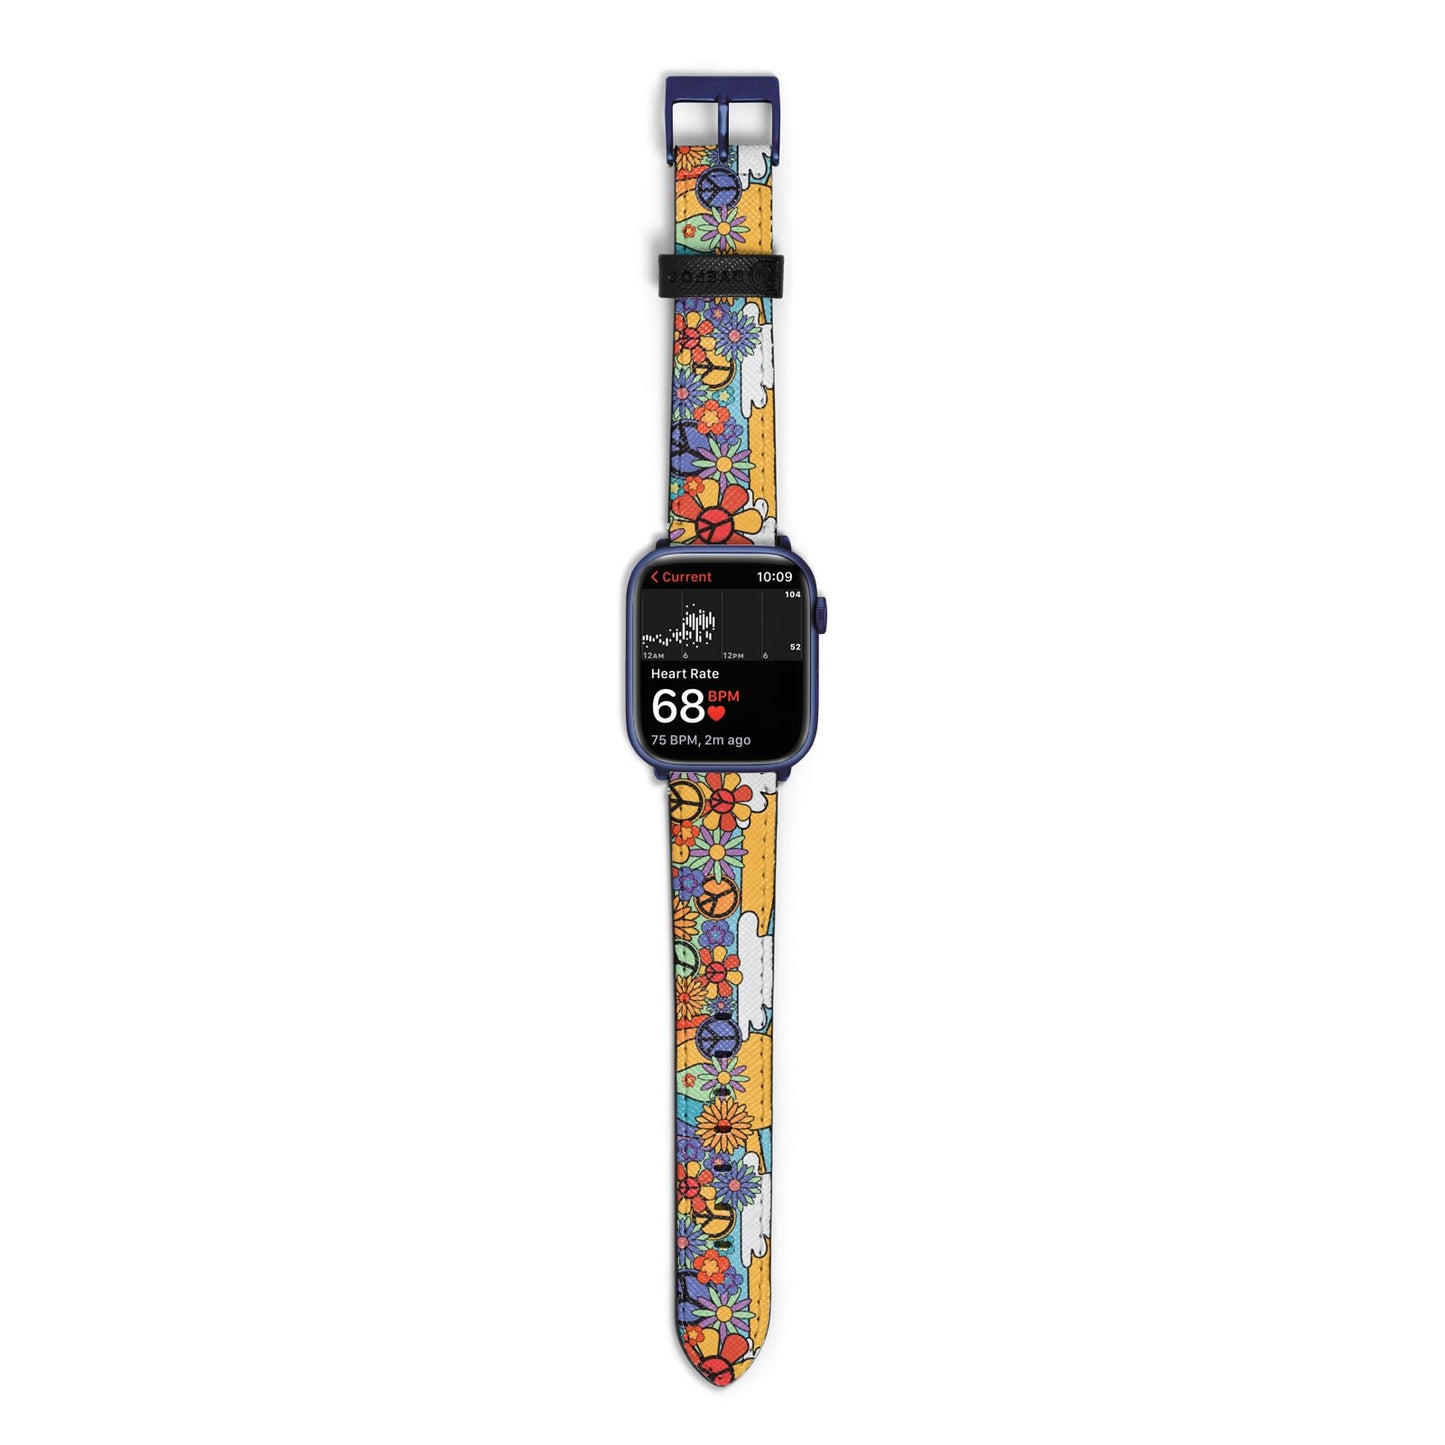 Seventies Groovy Retro Apple Watch Strap Size 38mm with Blue Hardware